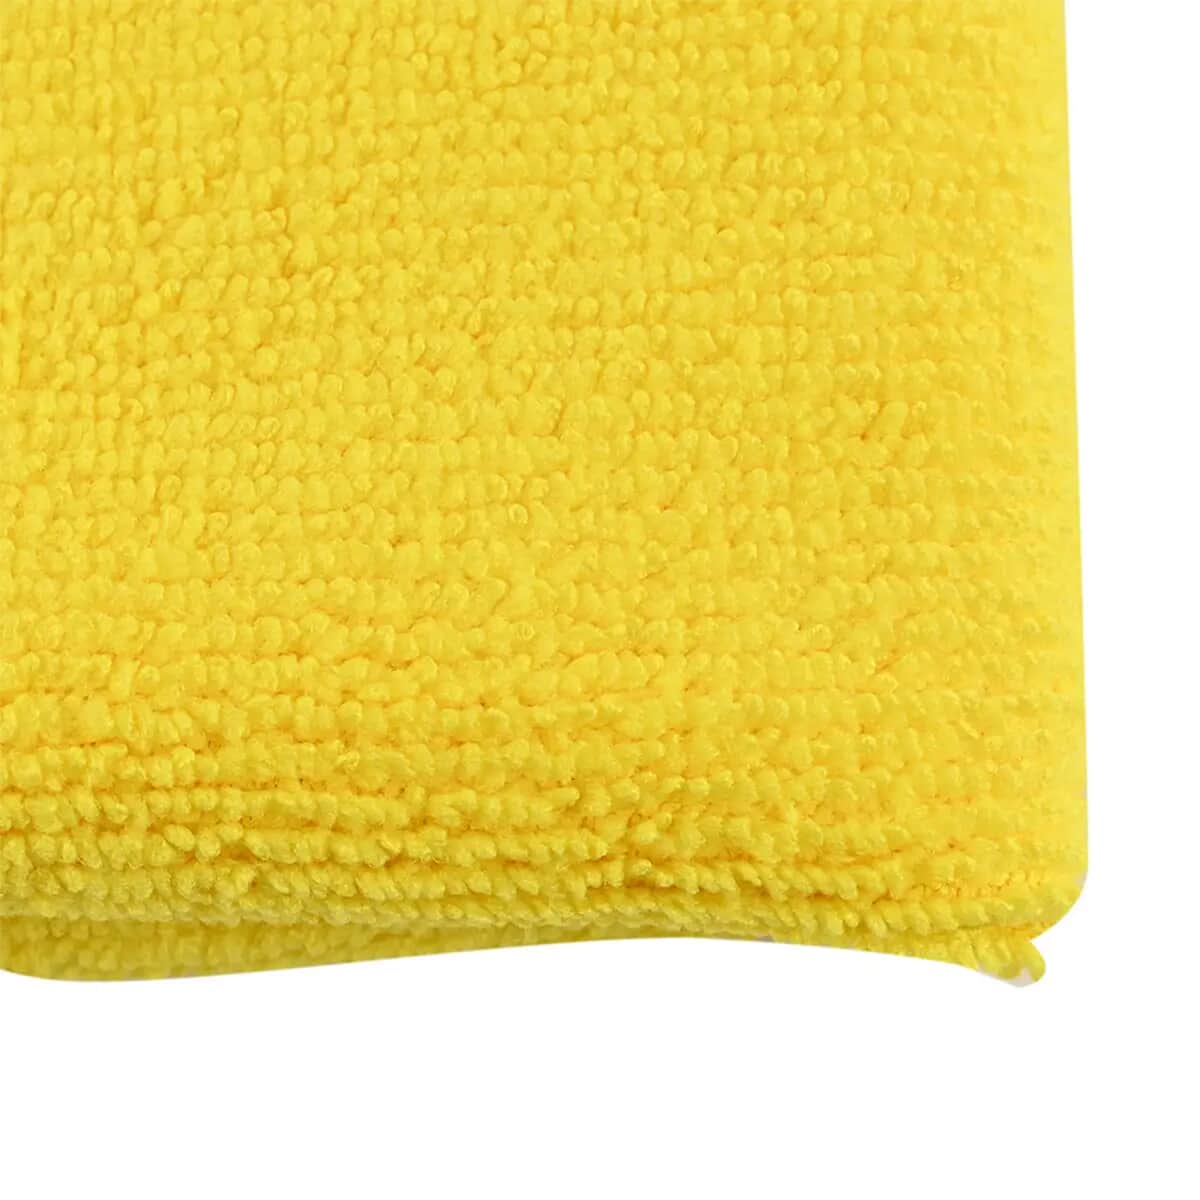 Shelby Yellow Machine Washable, Quick Drying, Reusable, Ultra-Soft Microfiber Wash Cloth With Signature Logo For Home Kitchen Car Bike Laptop Cleaning image number 6